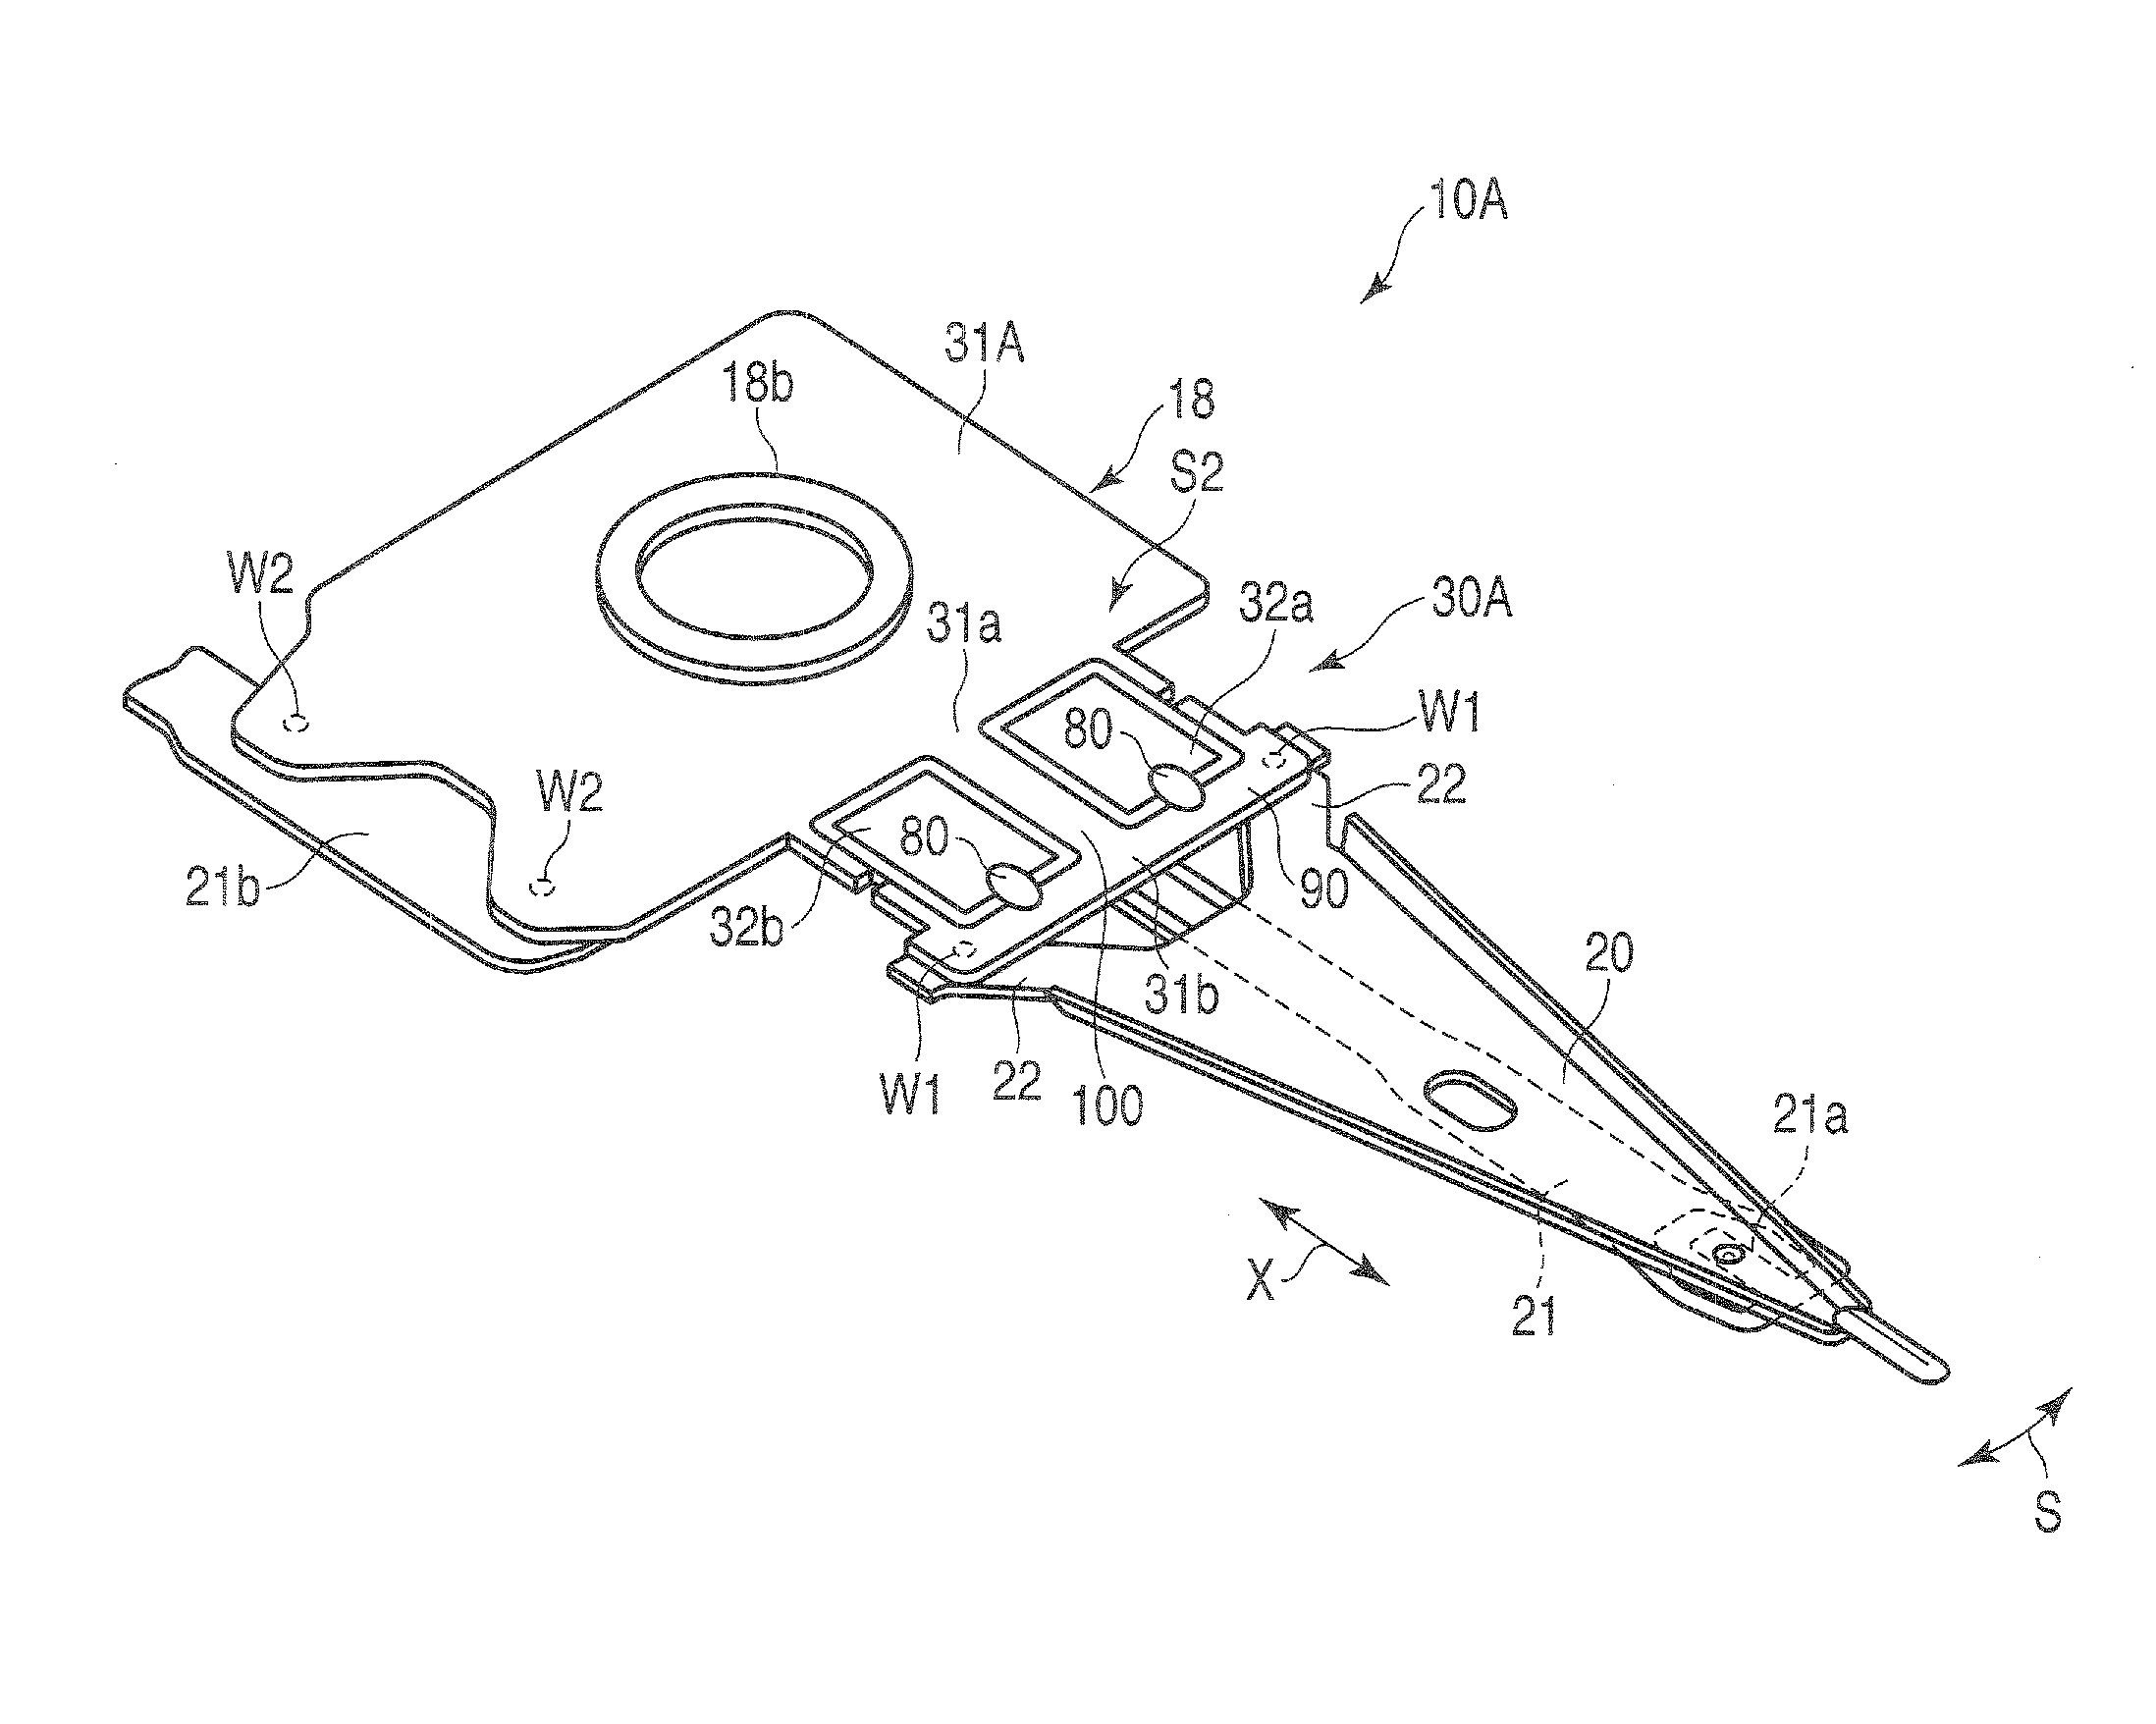 Electronic apparatus and disk drive suspension